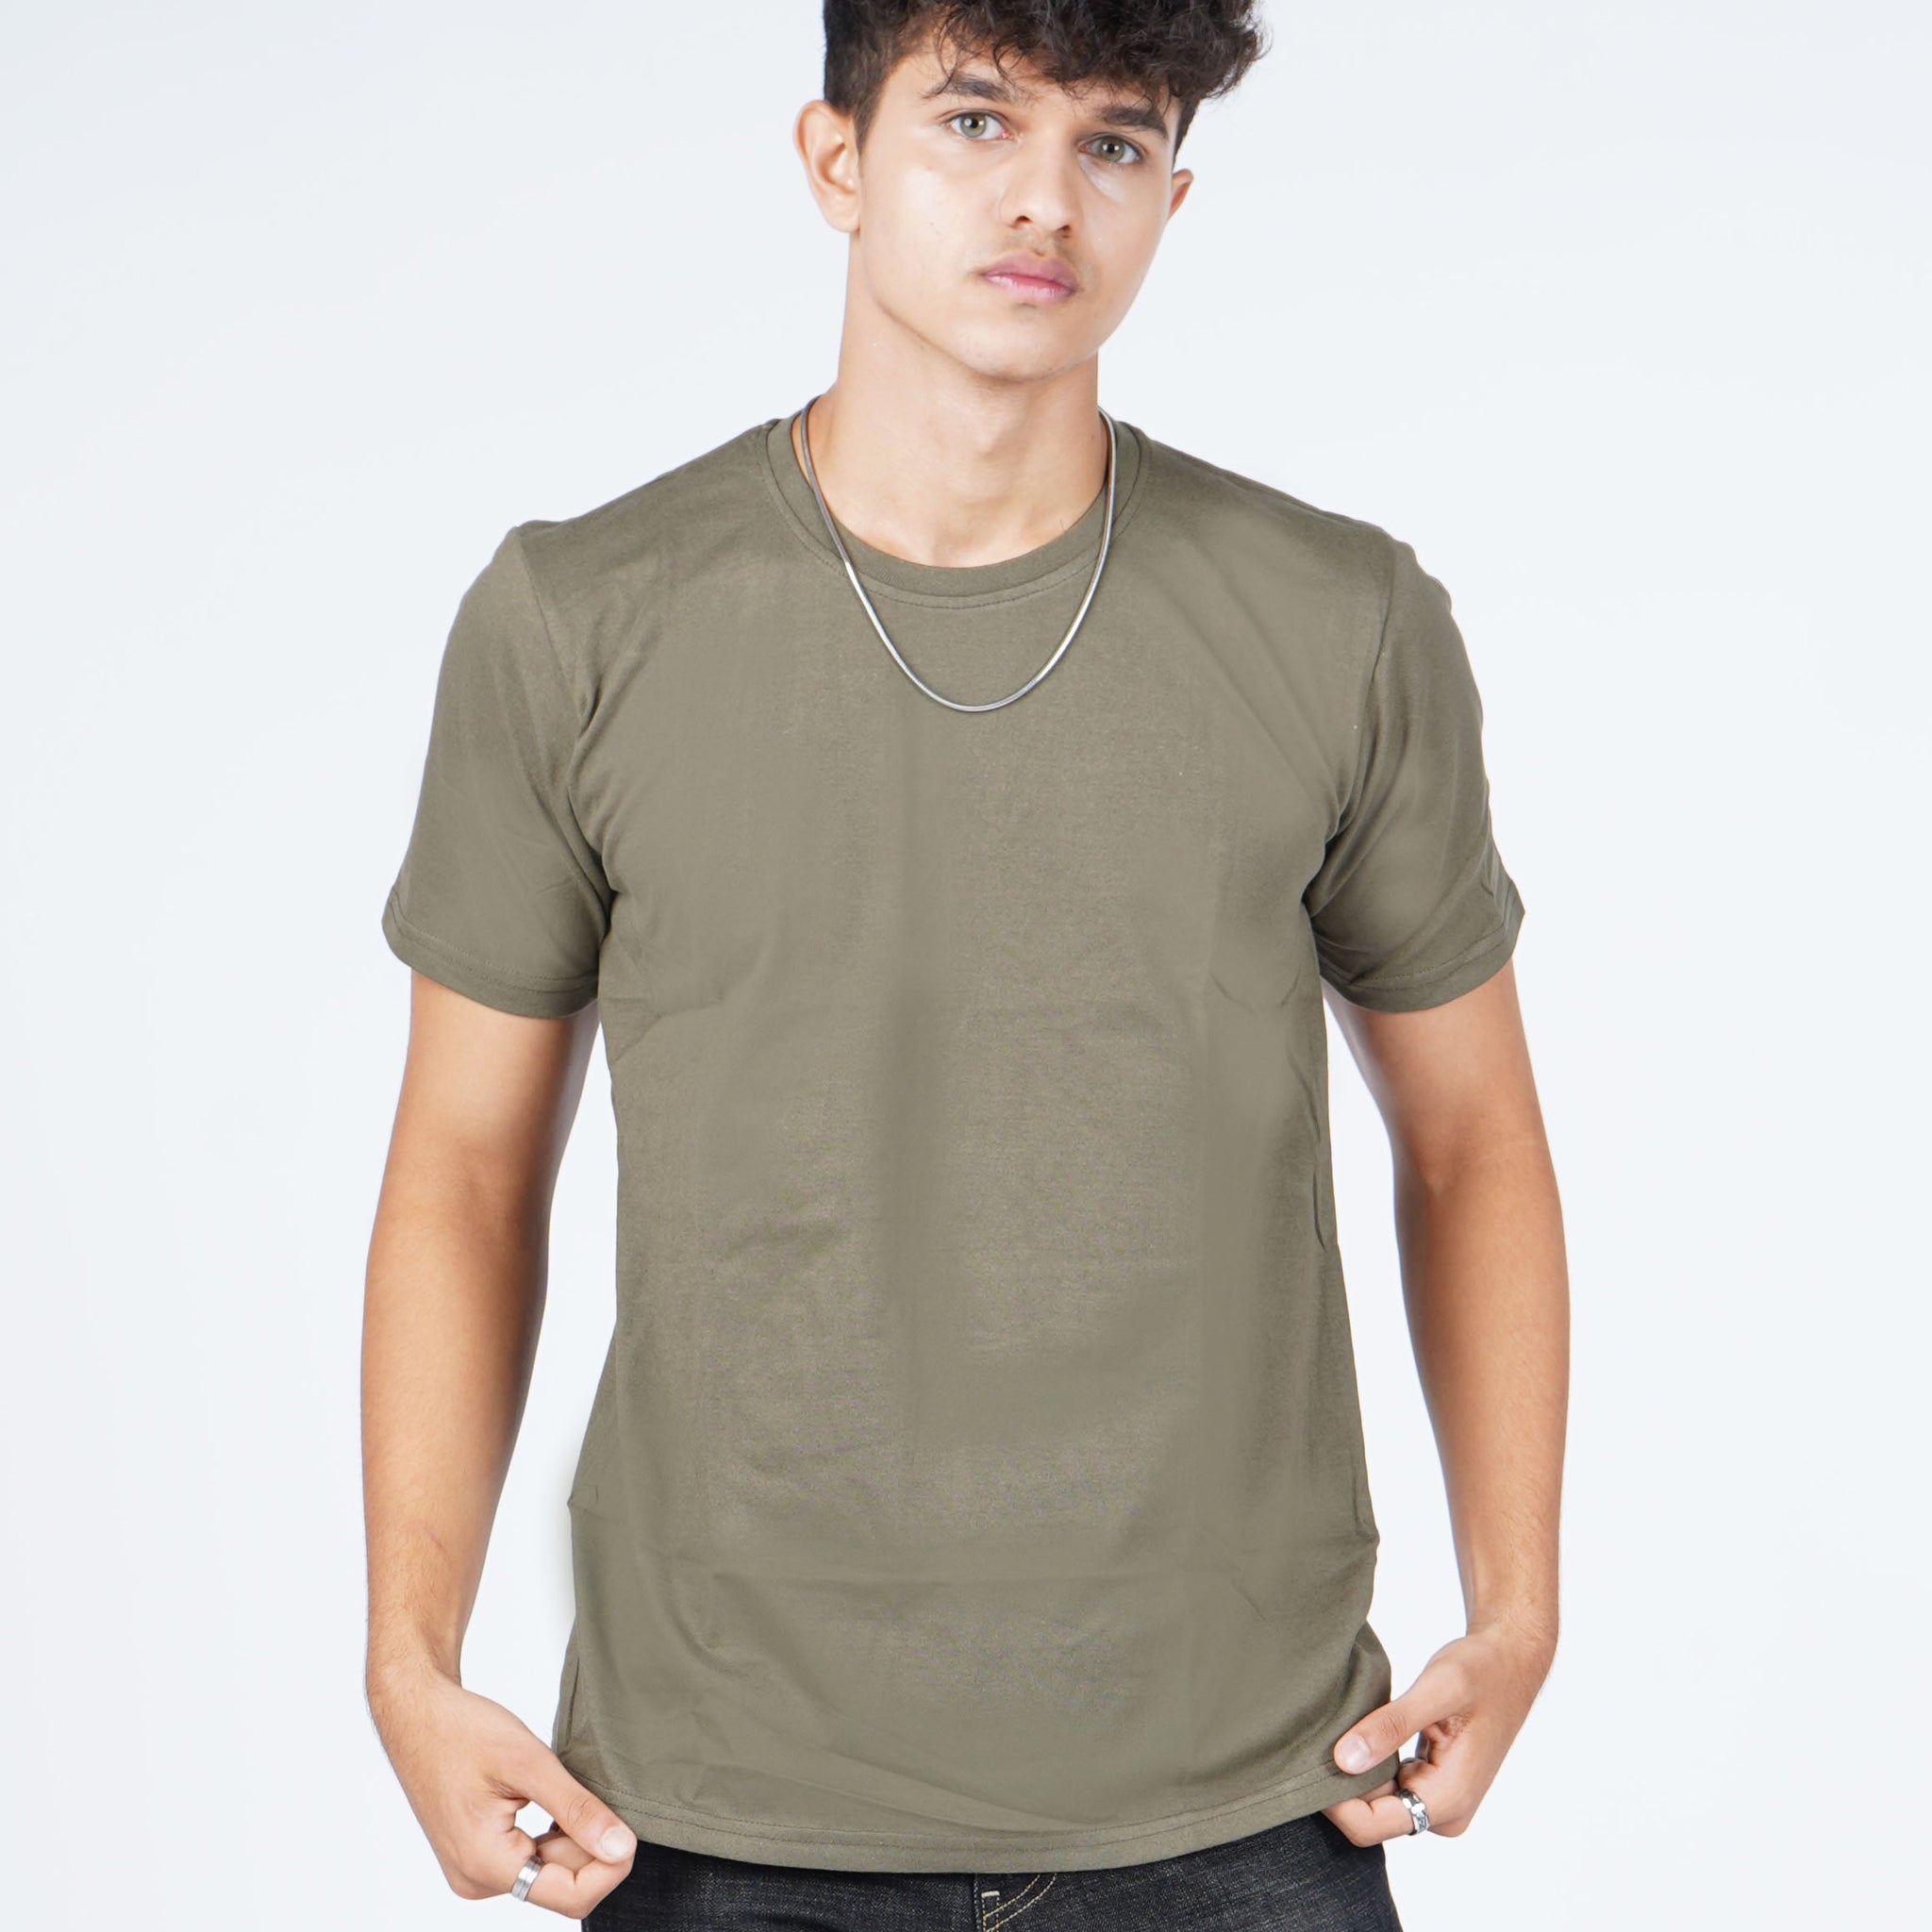 Olive Green Solid T-shirt Crew Cut/Round Neck Short Sleeves